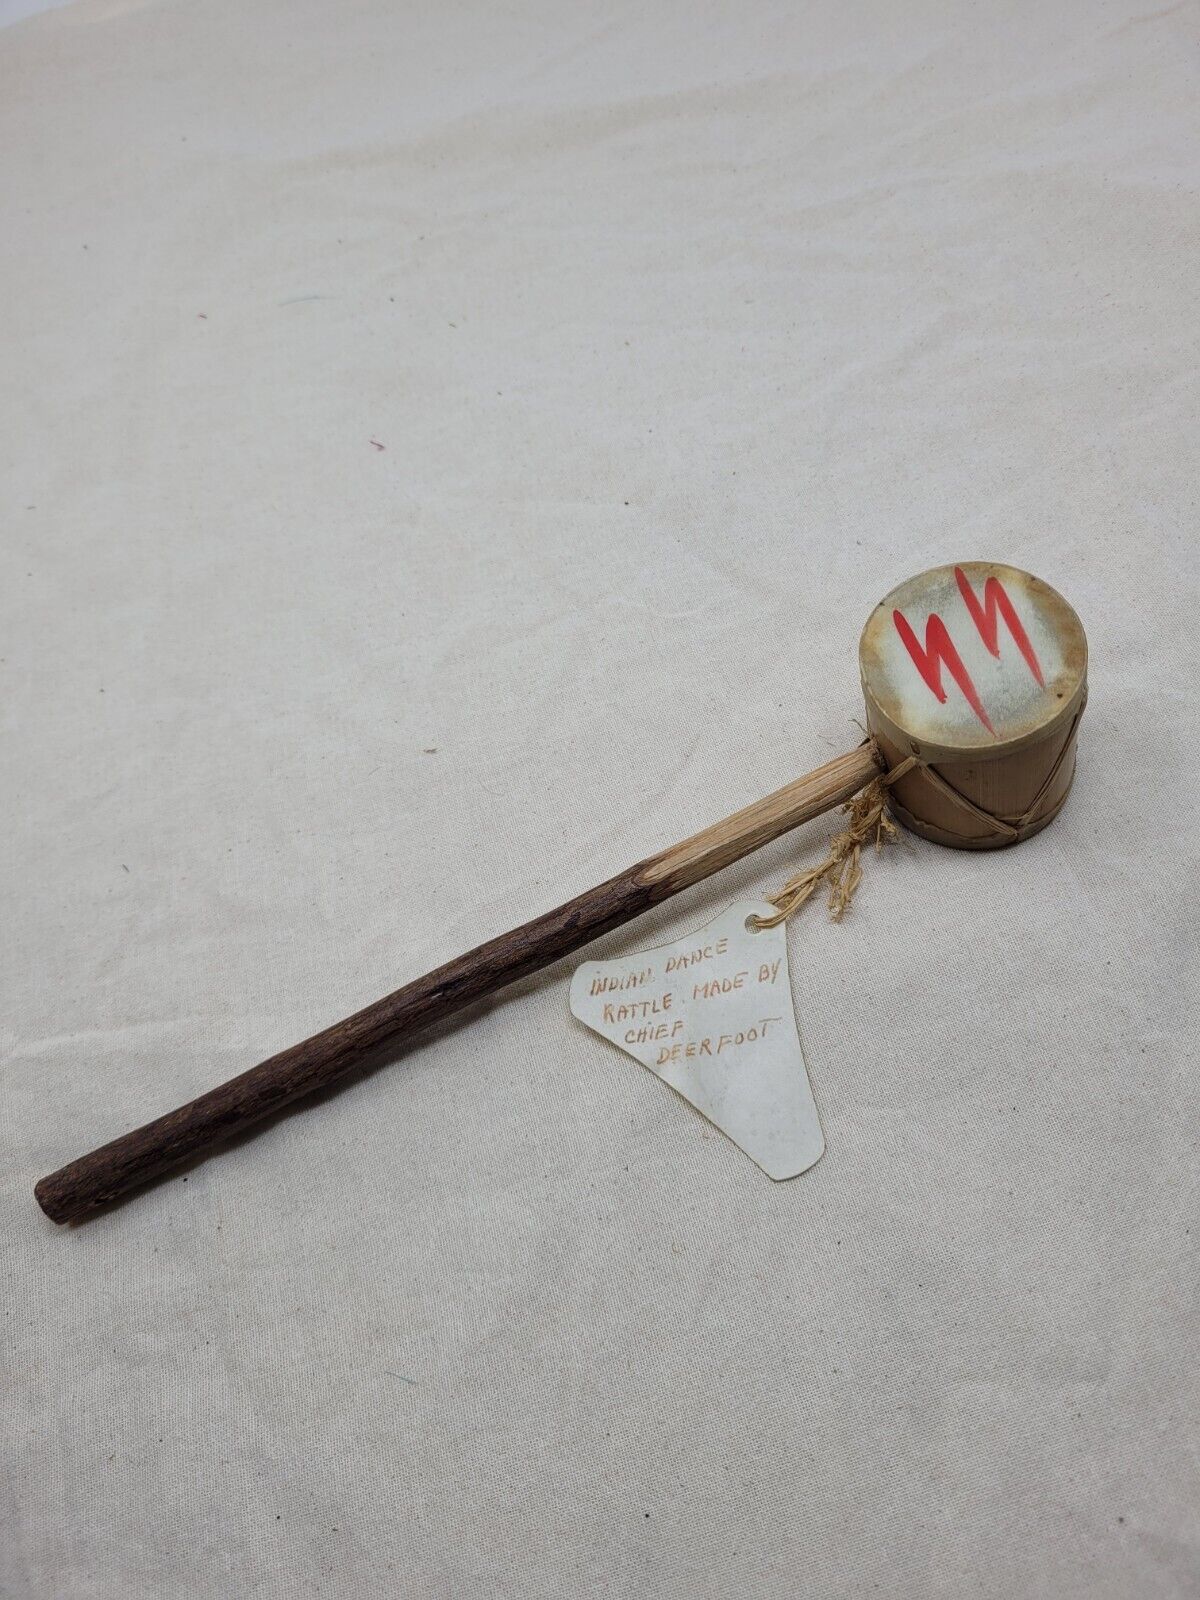 vintage Indian dance rattle made by chief deerfoot